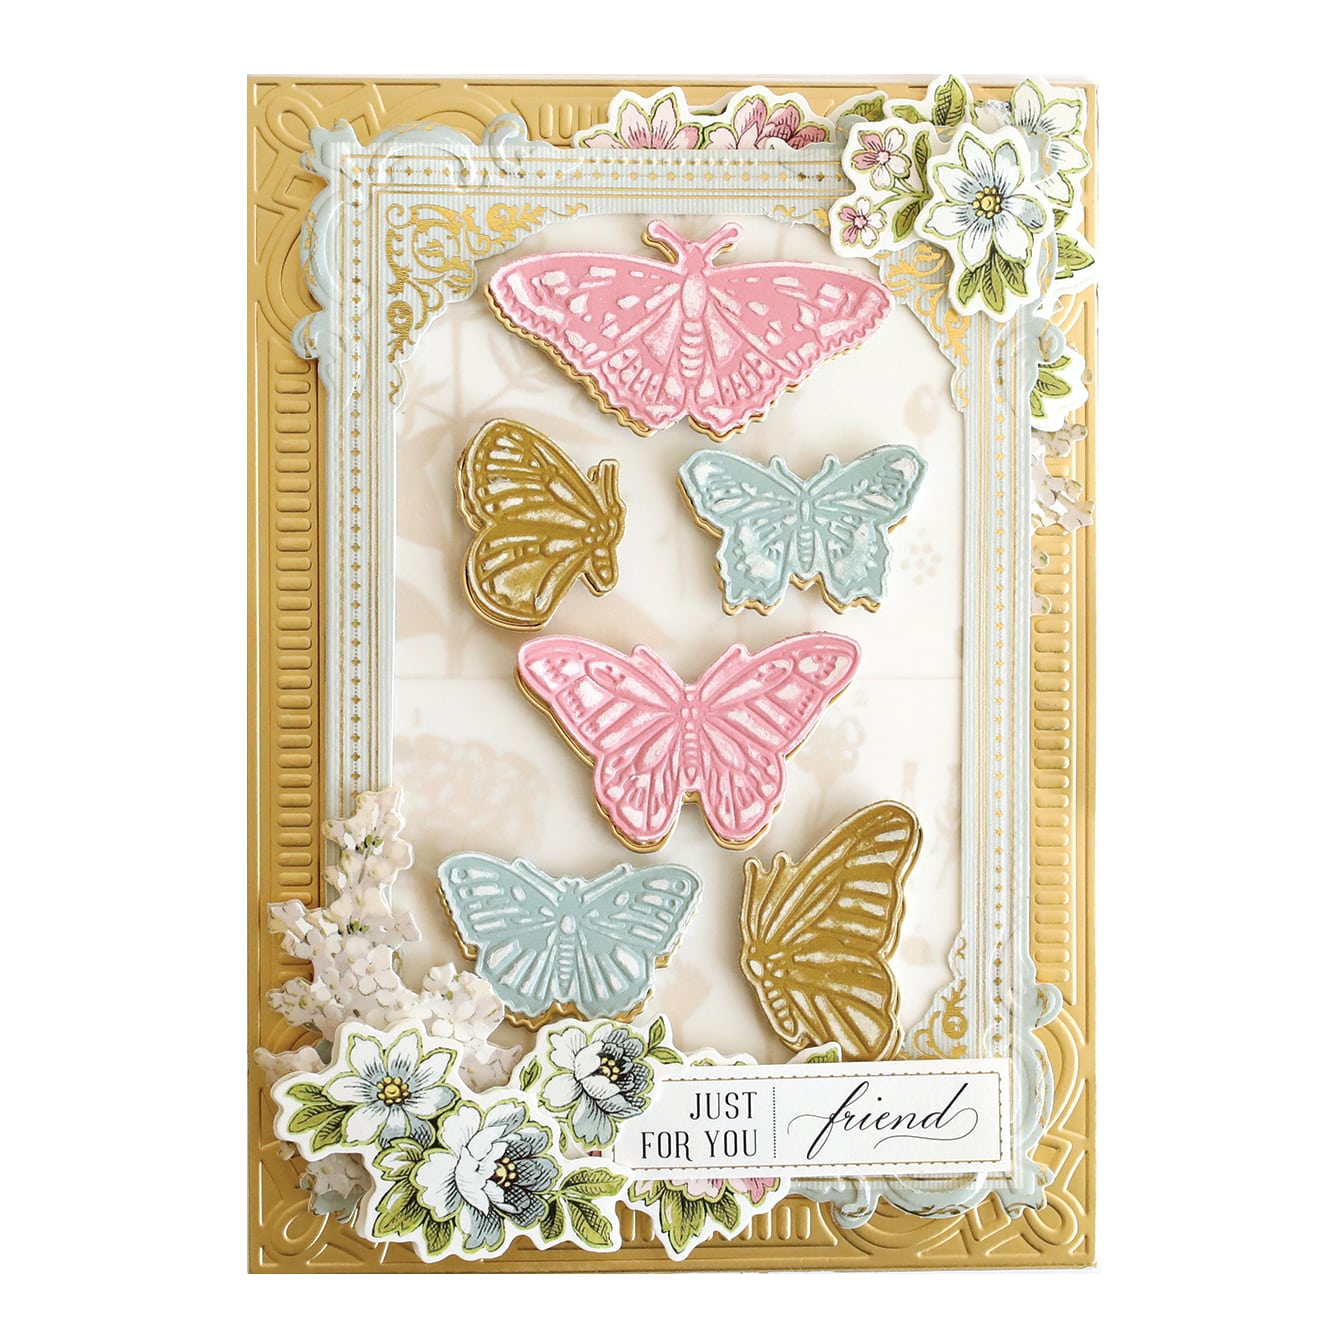 a card with butterflies and flowers on it.